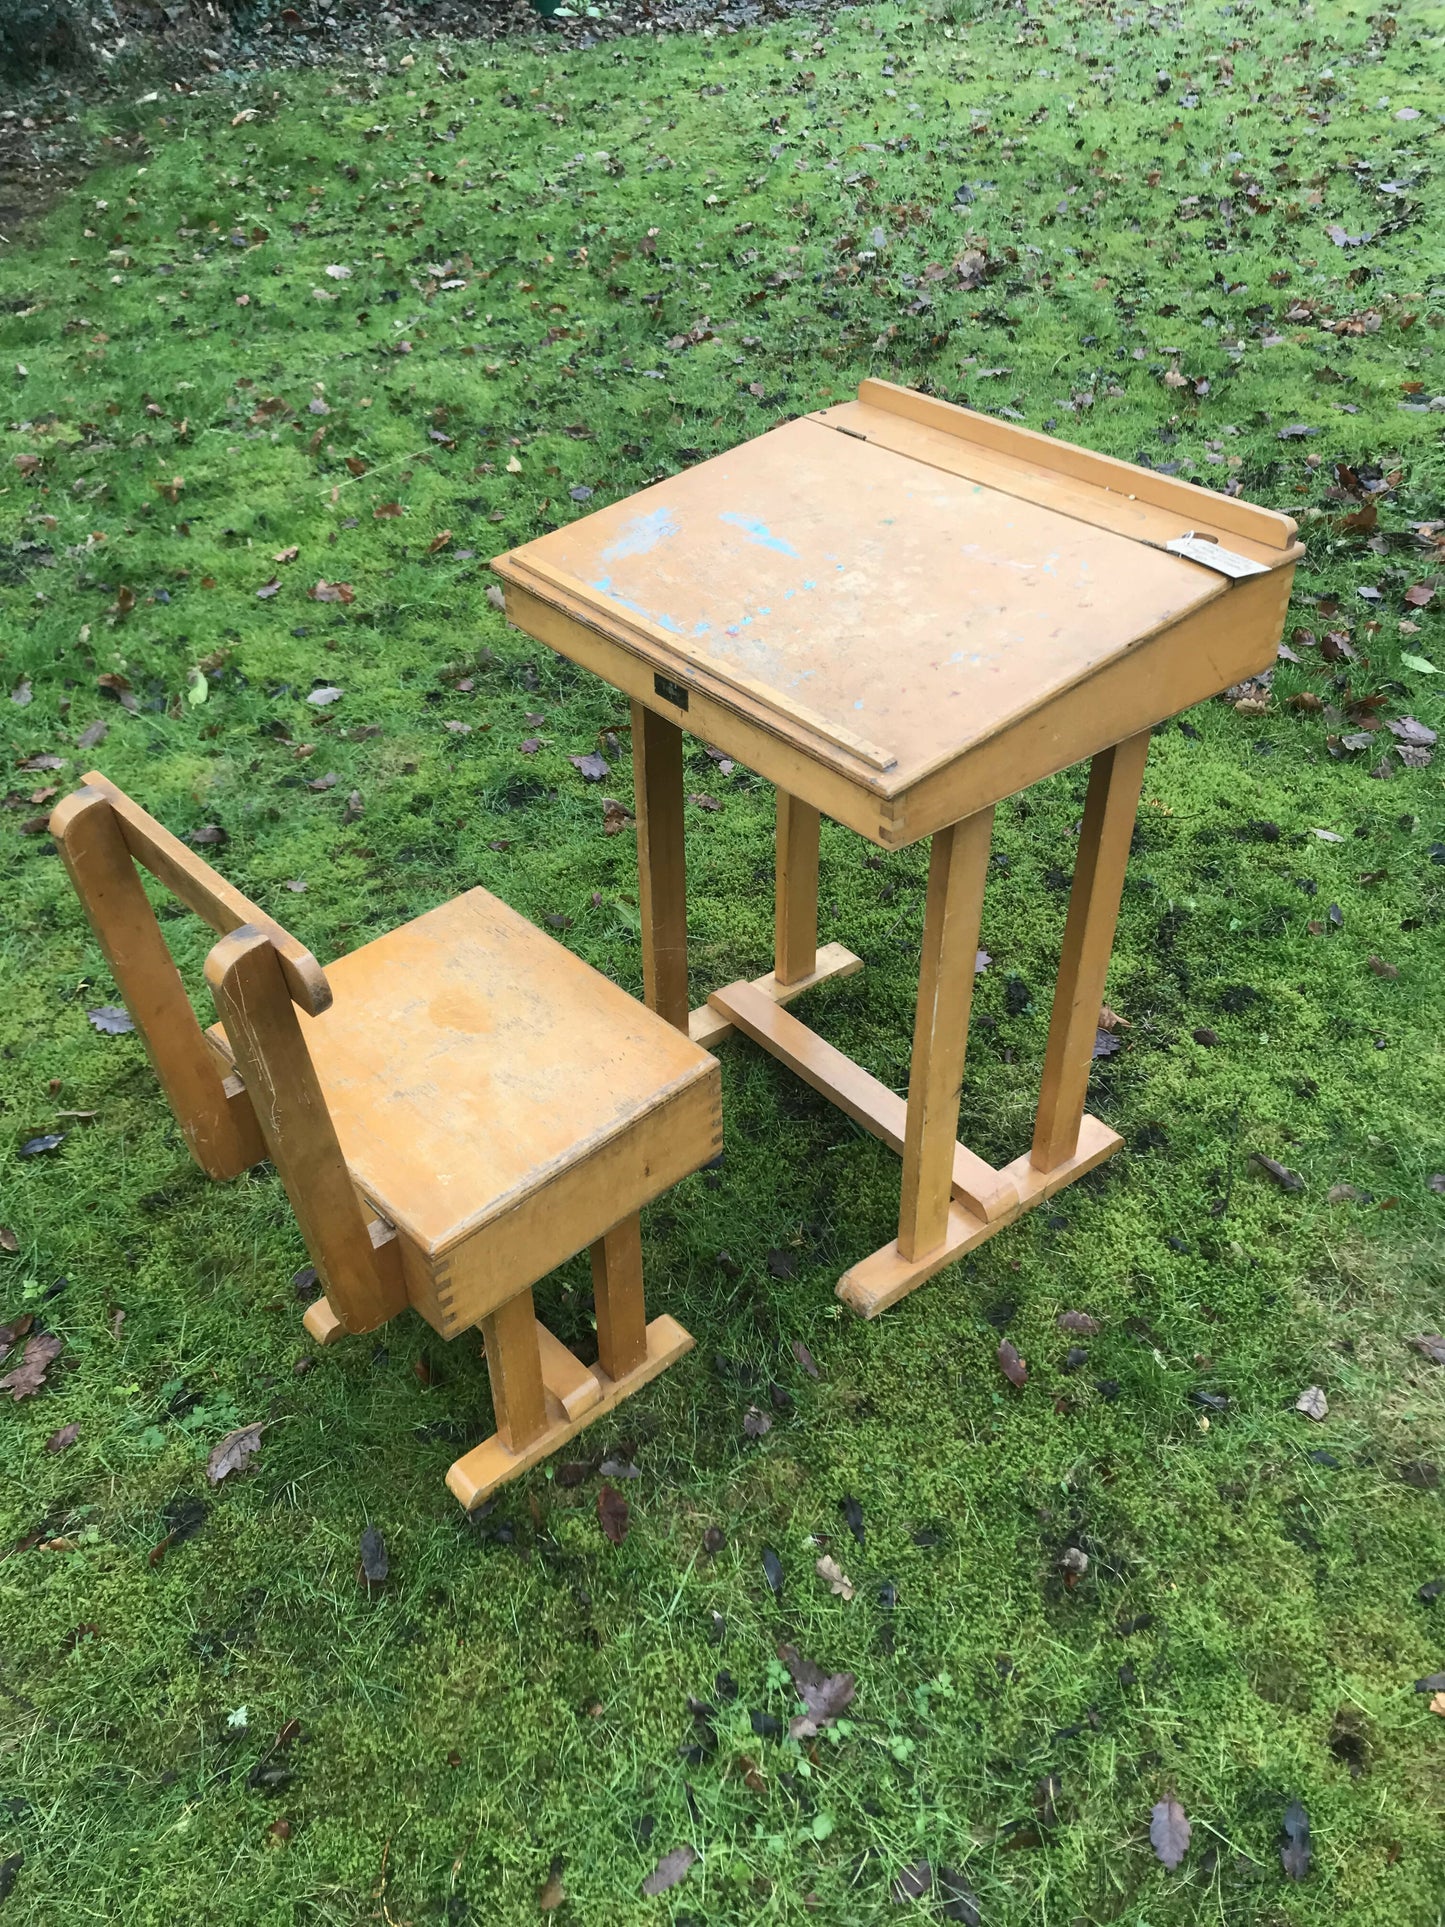 Vintage Wooden School Desk and Chair